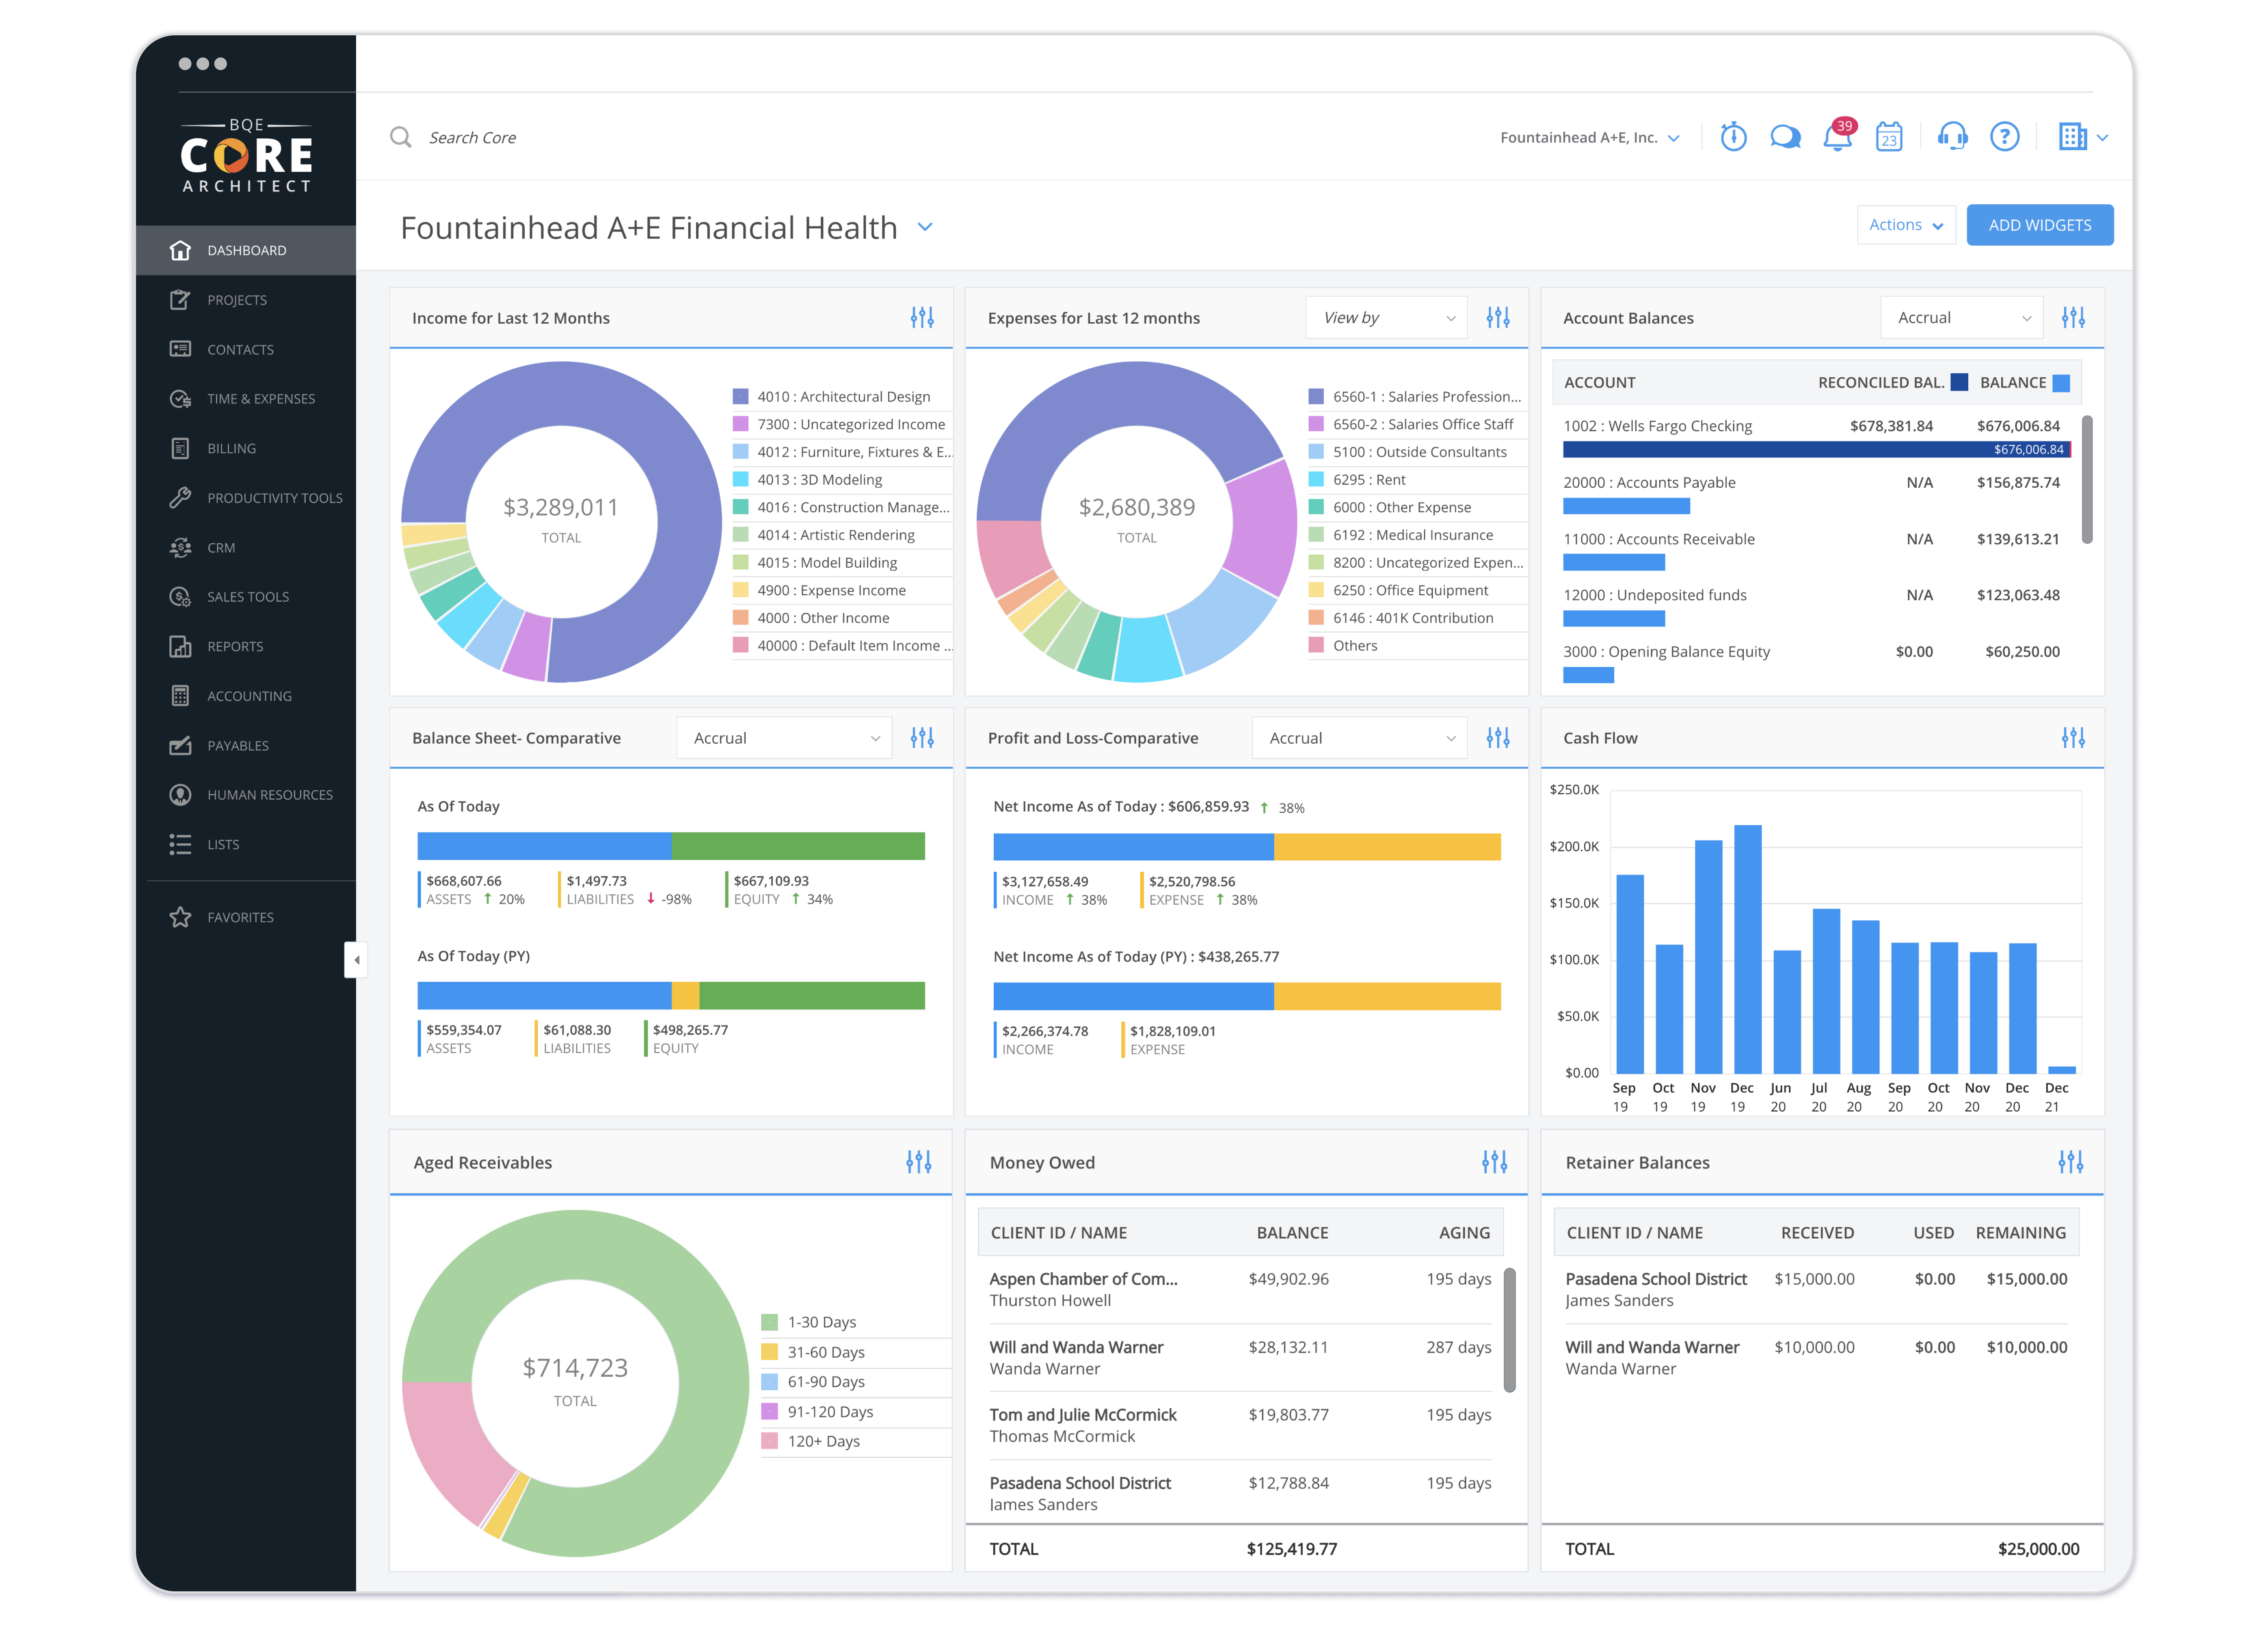 Customizable Dashboards with Actionable Insights for Impactful Decision Making